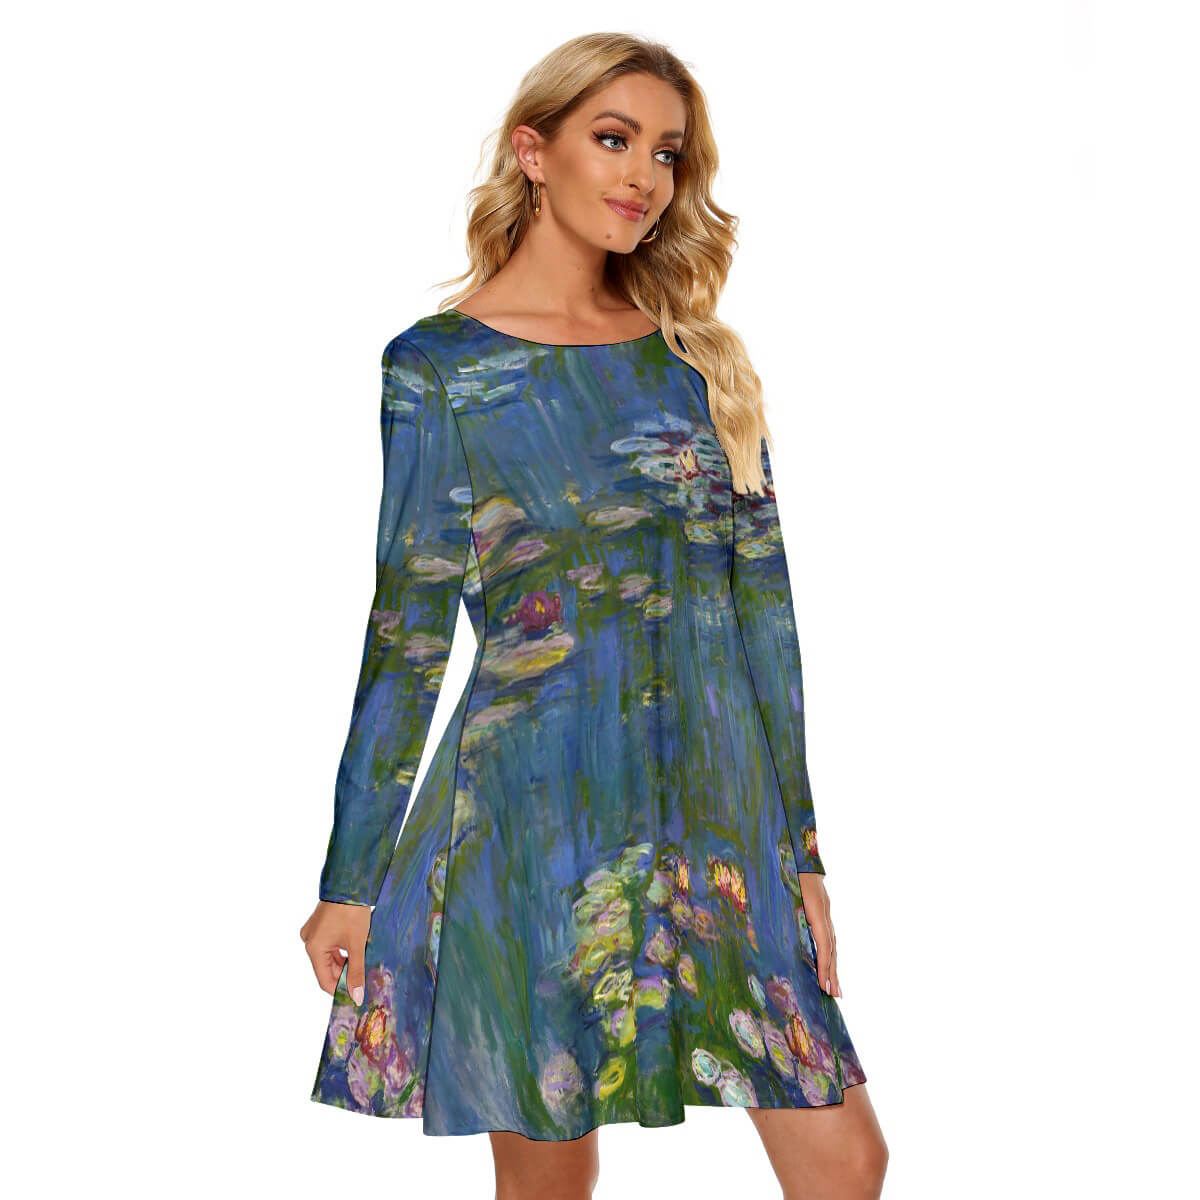 Tranquil Lily Pond Dress with Floral Print